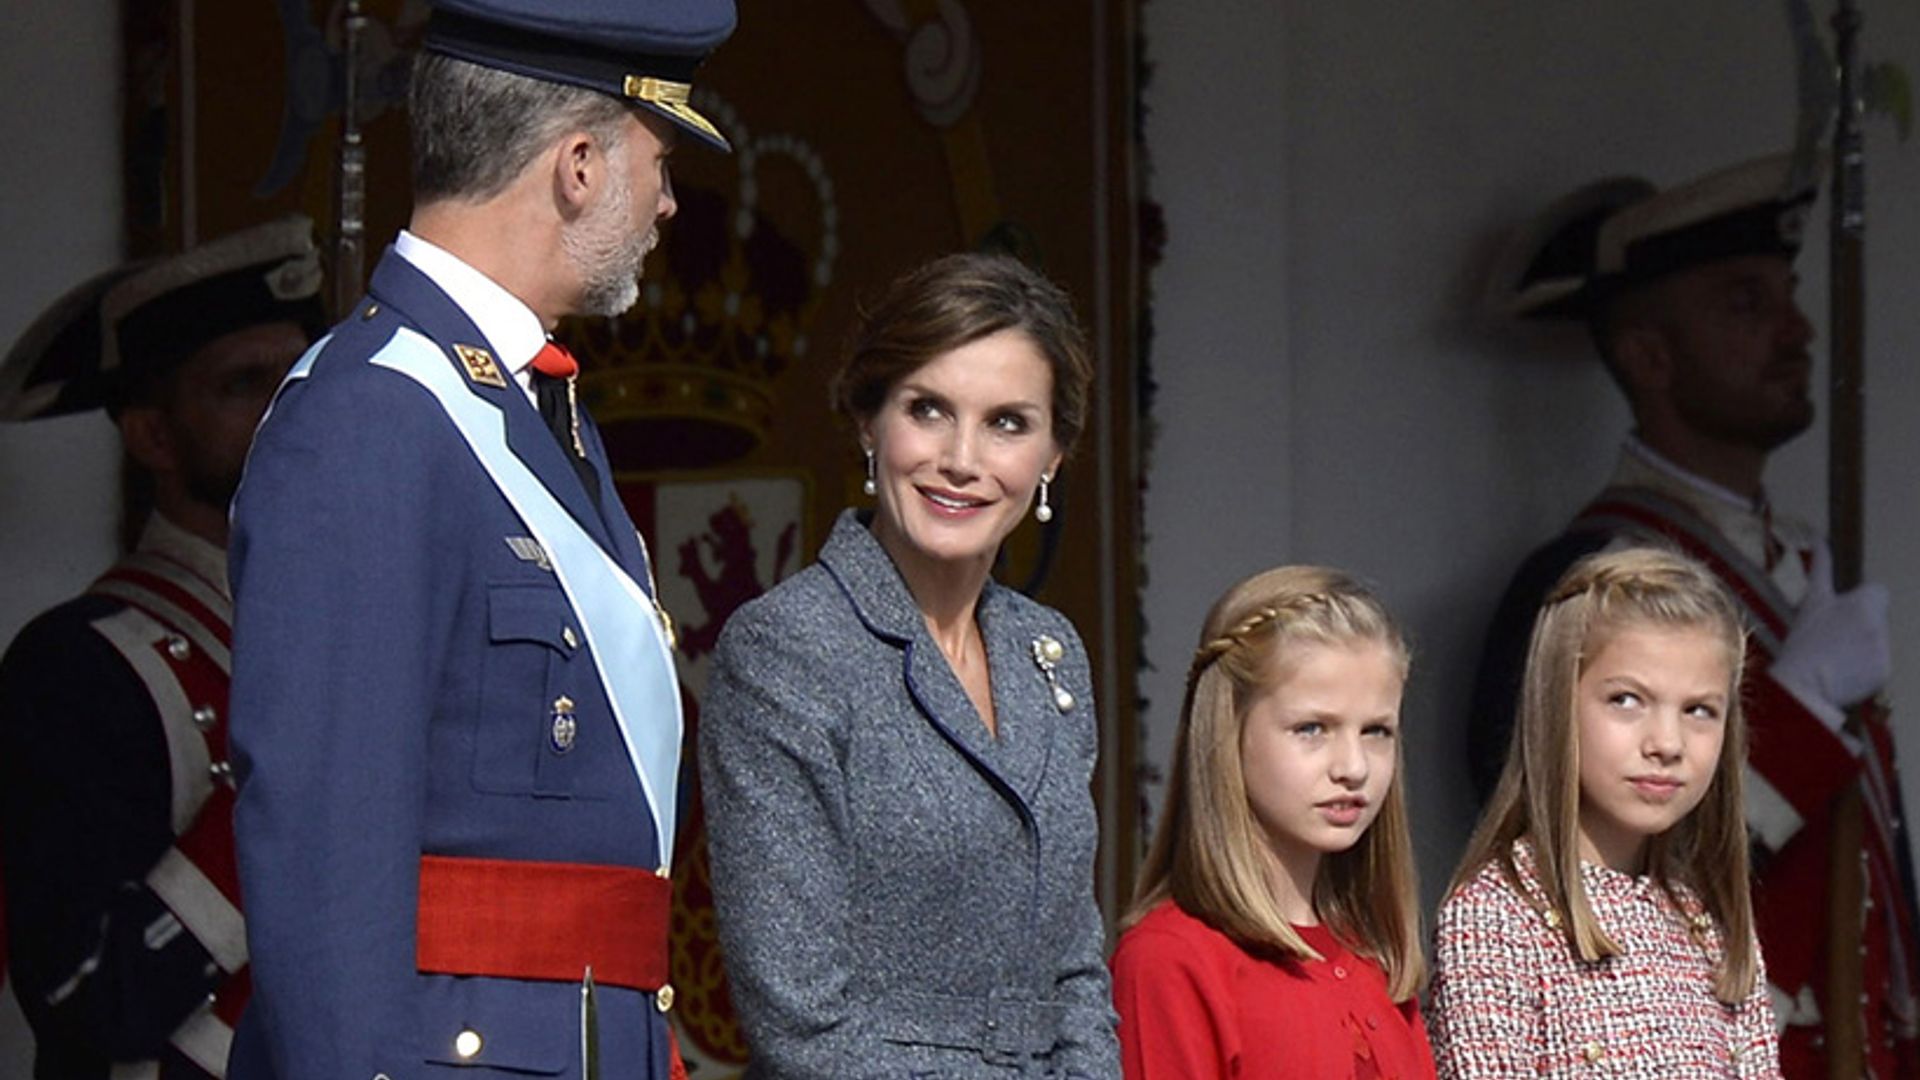 King Felipe and Queen Letizia joined by daughters at Spain's National Day parade